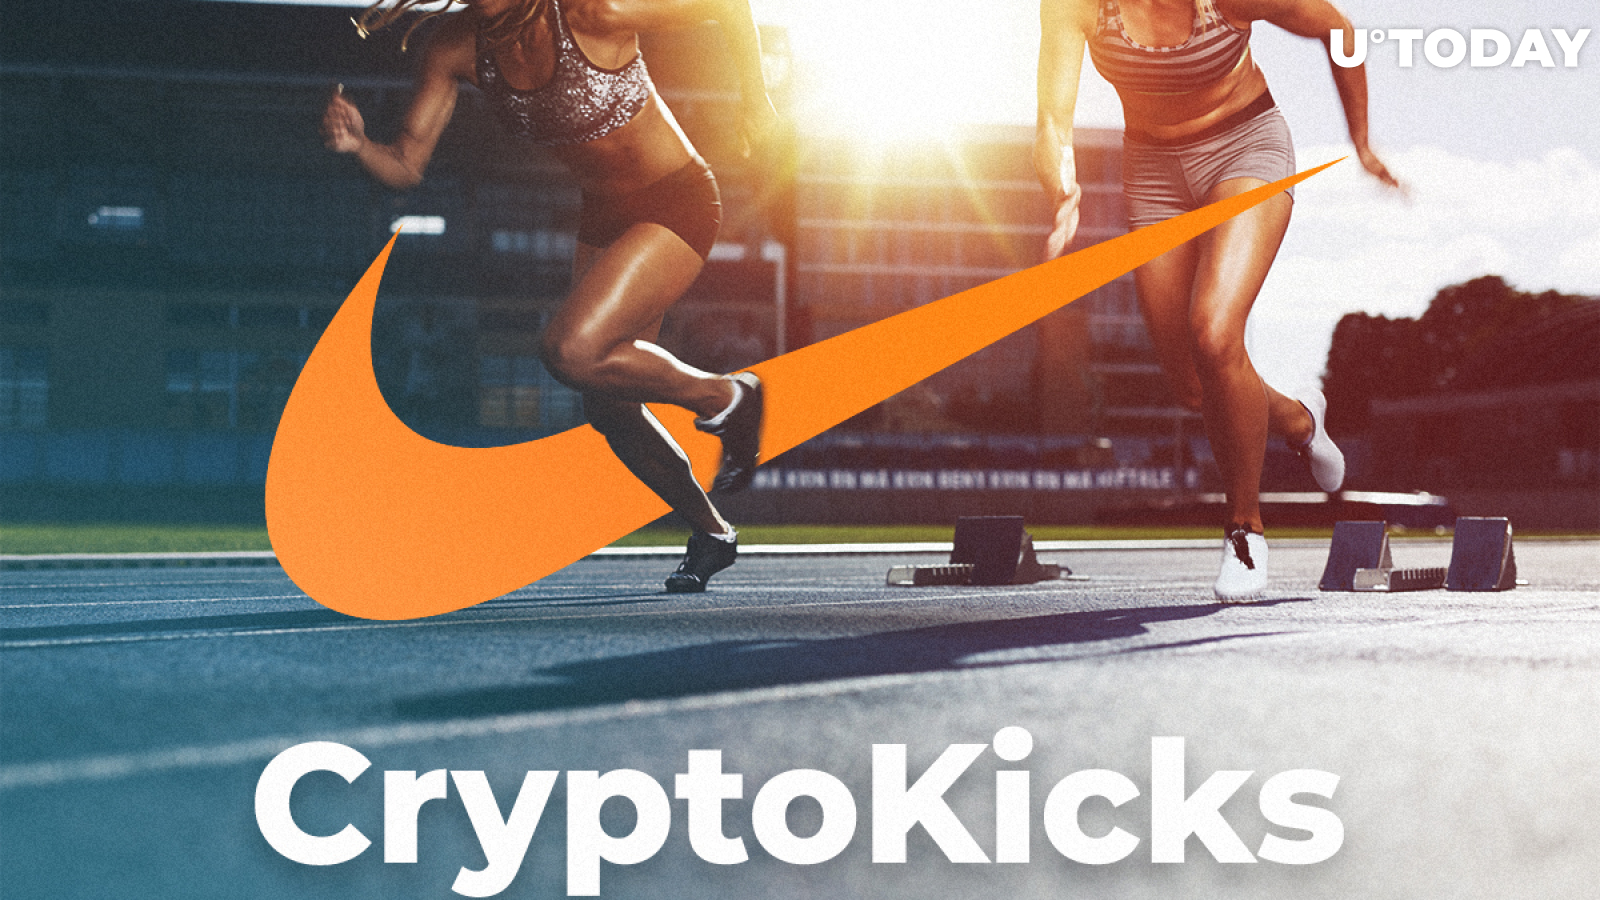 Are Cryptocurrencies the New Tool of Corporations as Nike Trademarks ‘Cryptokicks’?